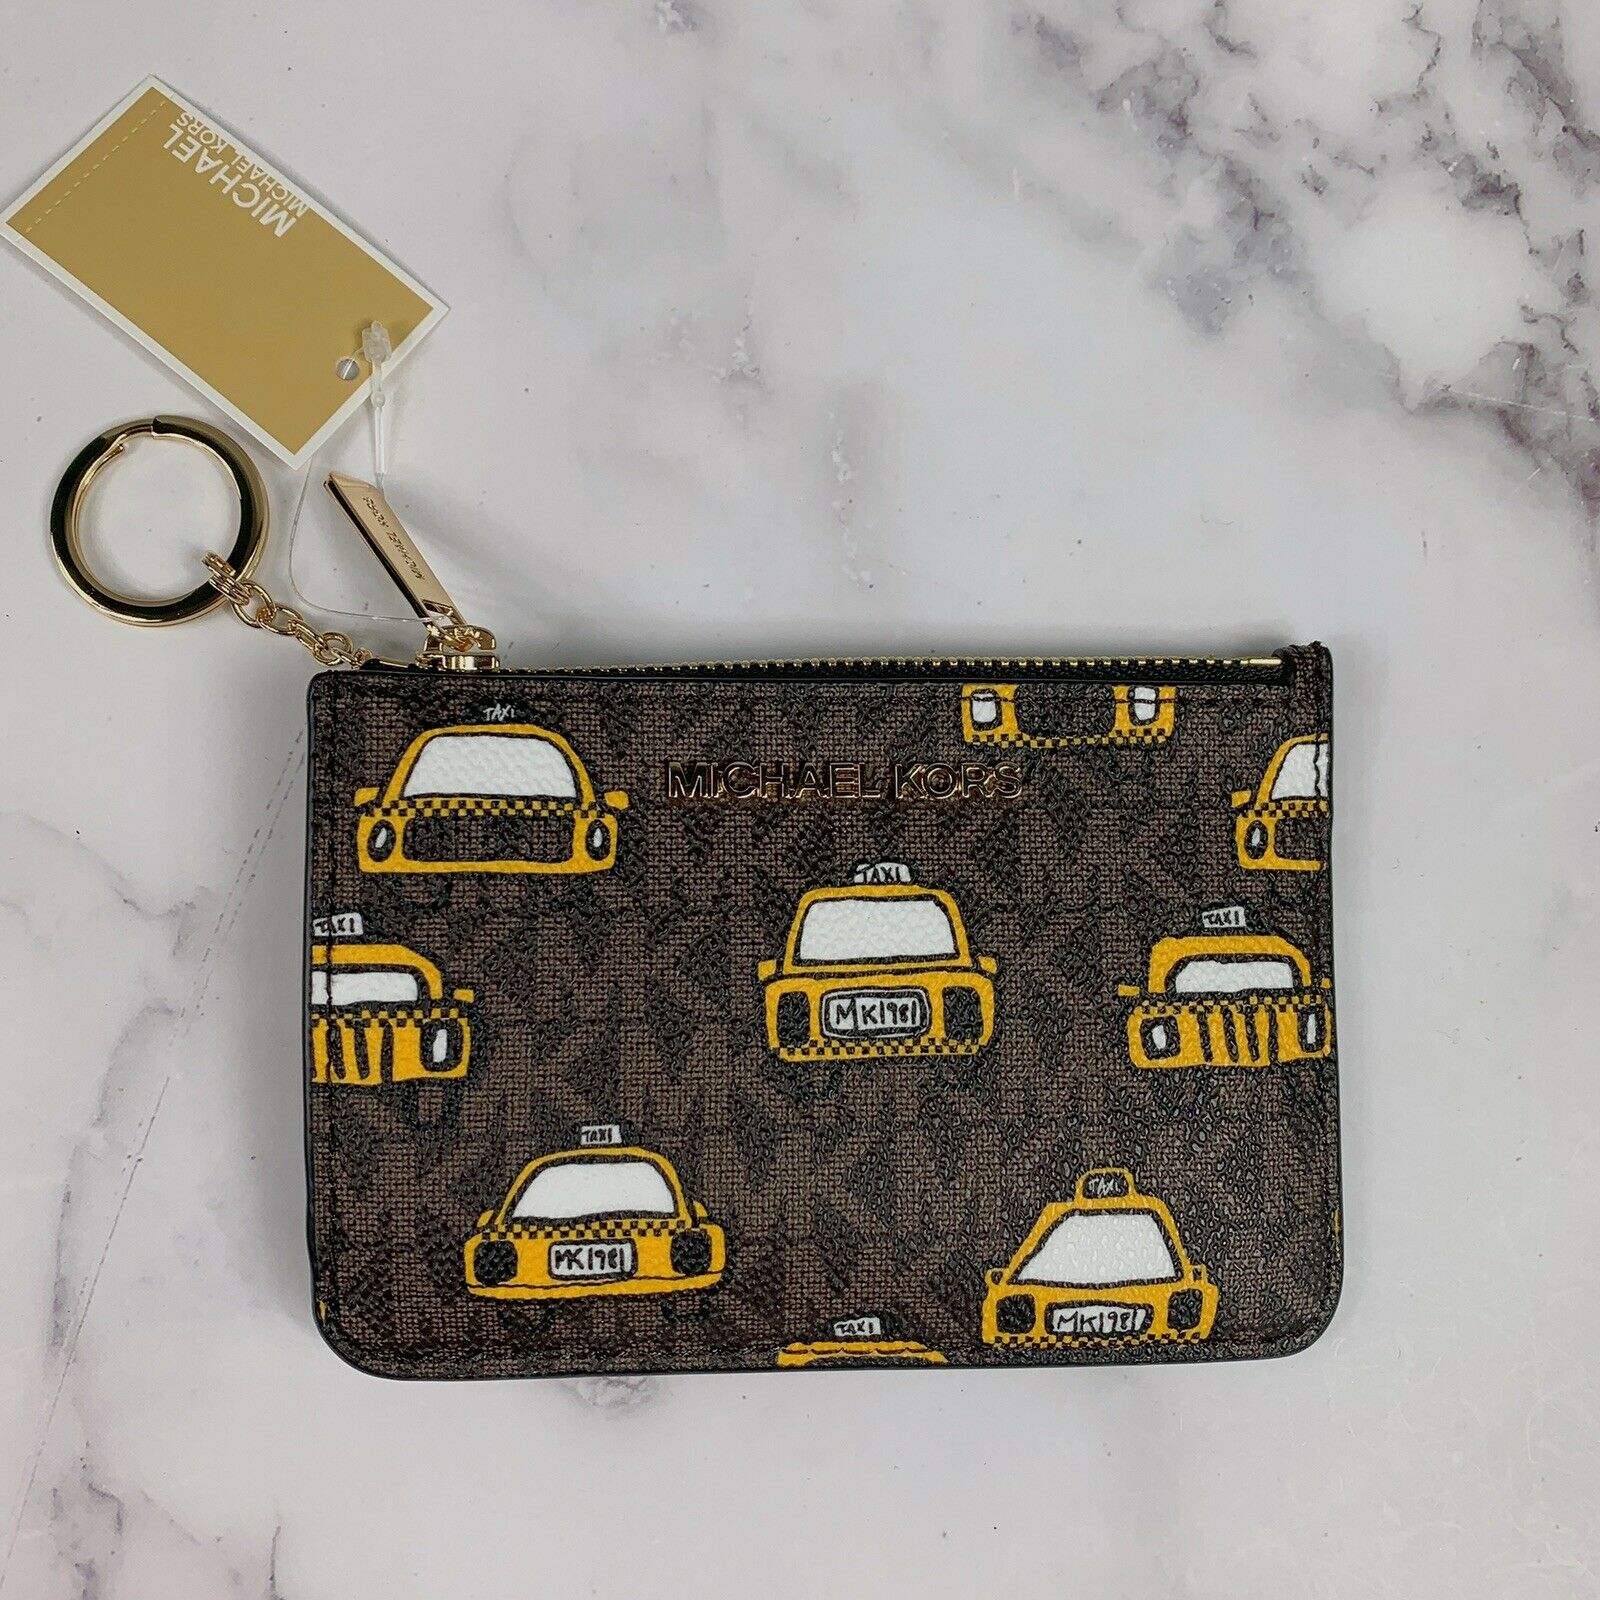 Michael Kors Nyc Jst Sm Coinpouch Id Holder Leather Wallet Mk Brown Yello Taxi - image 2 of 3